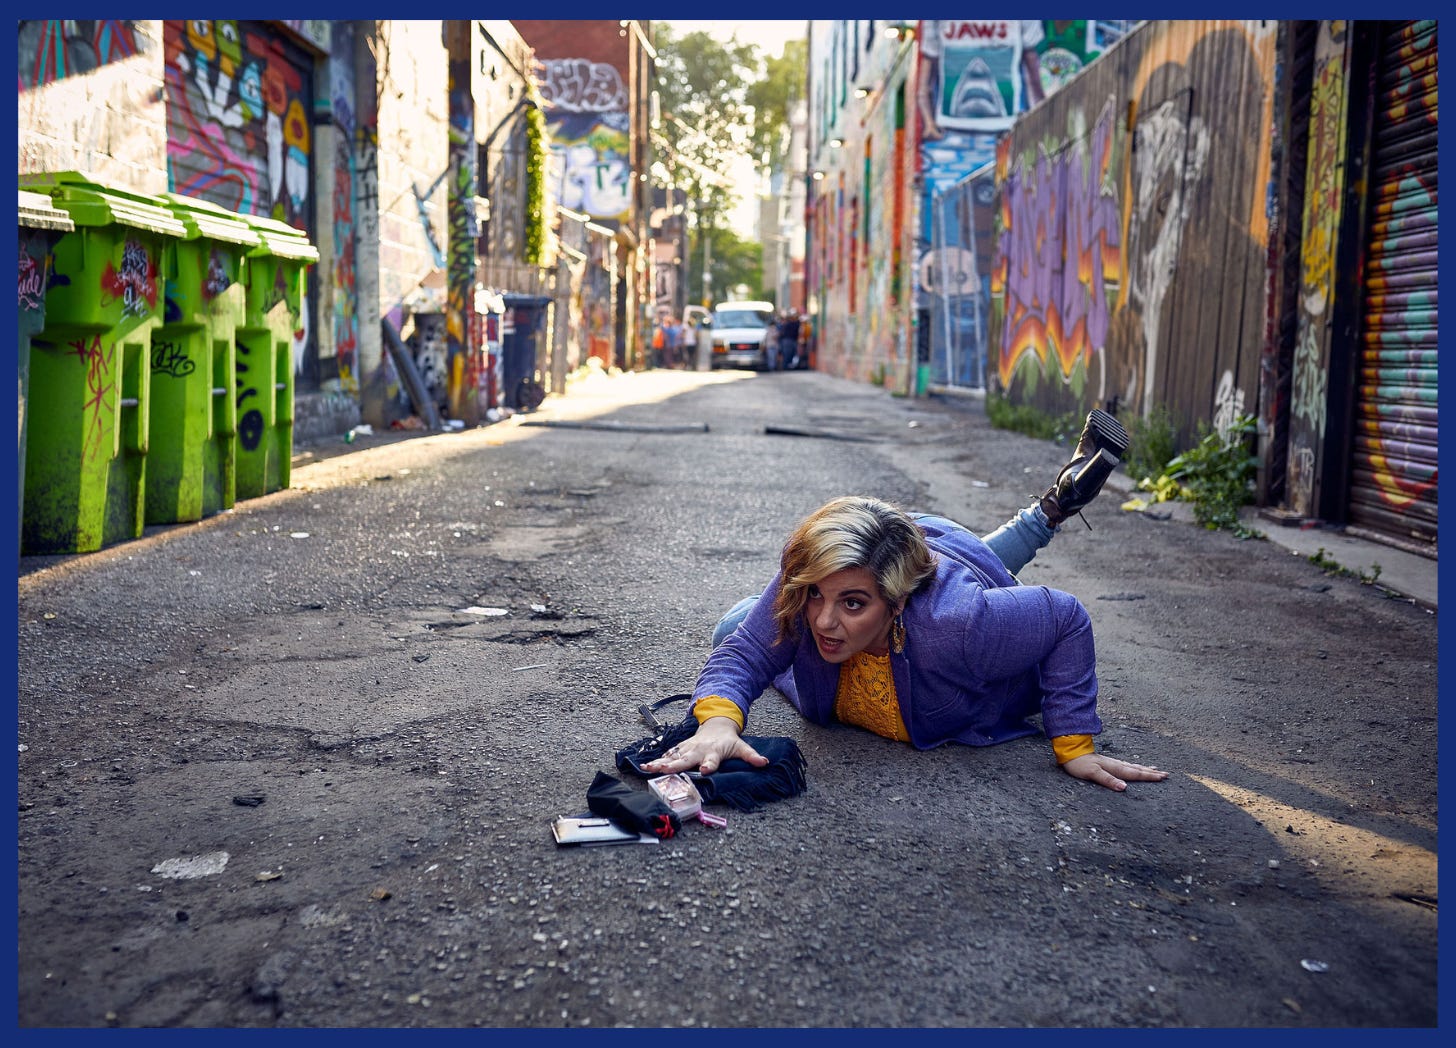 Stylish Autistic woman falls in an alley. Unmasking Autism Blog: I Kept Going When I Couldn't. Autistic Blog | Sensory needs: from inside Angela's Autistic mind